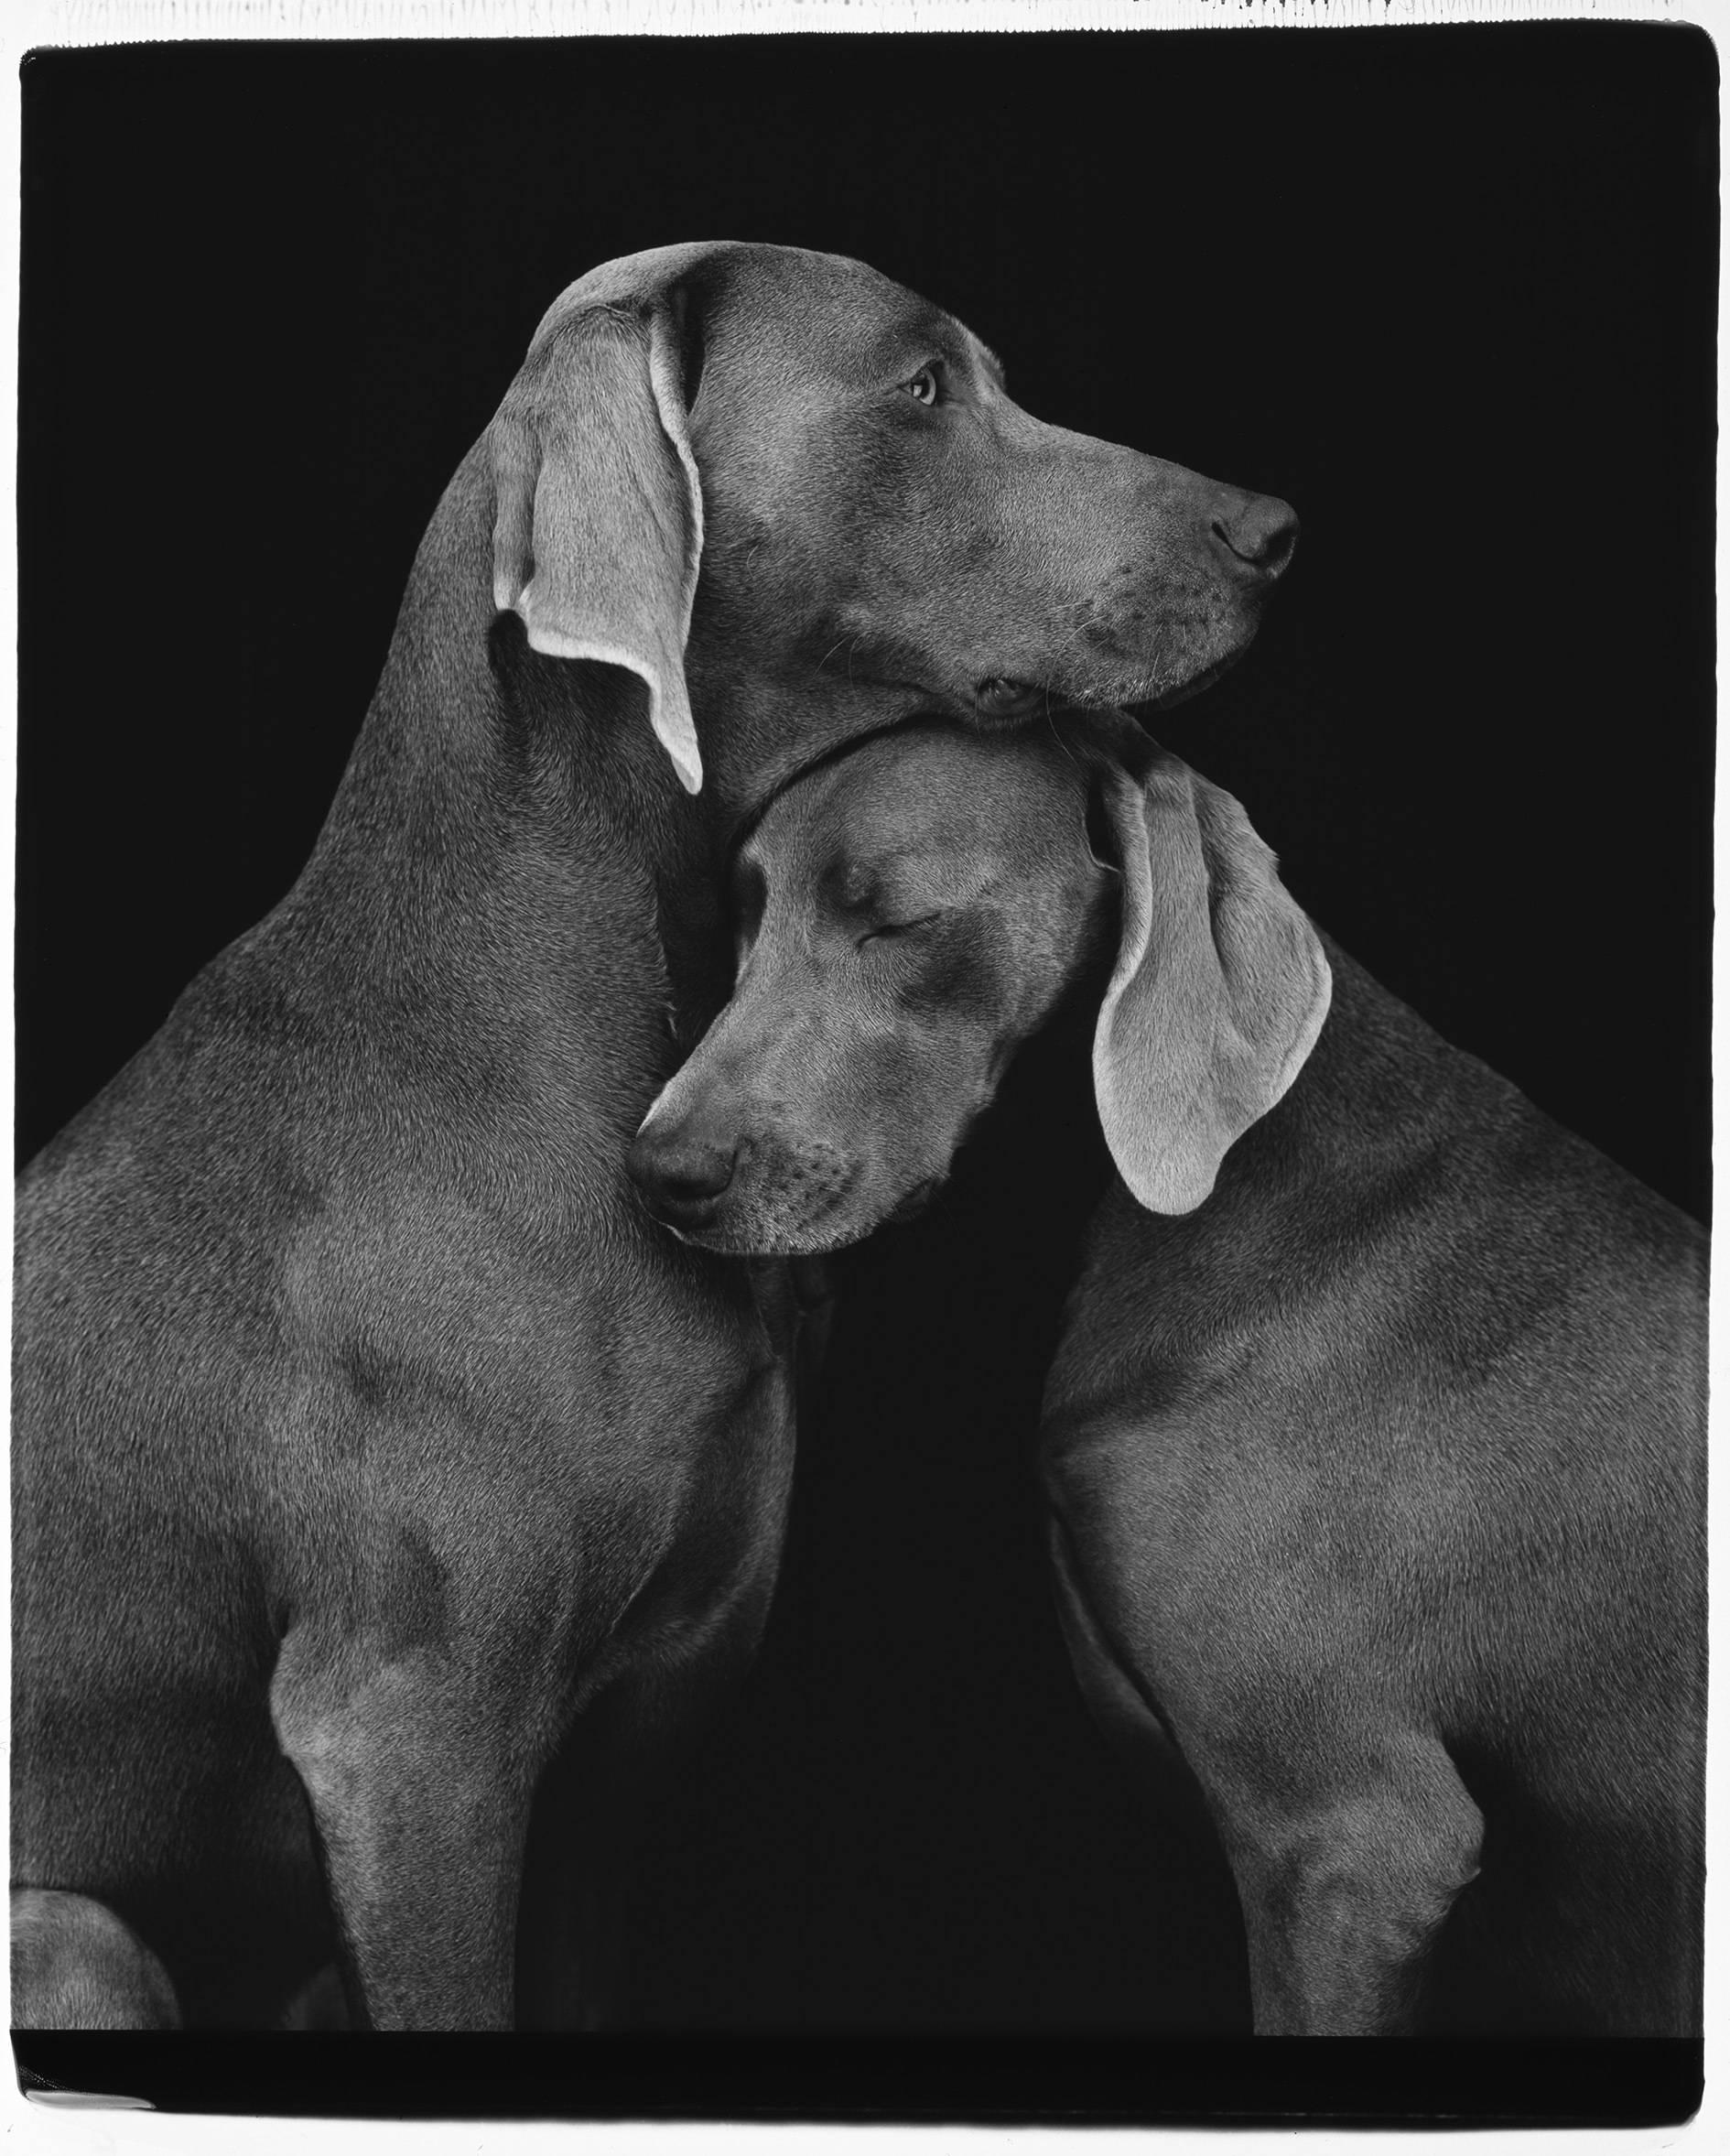 William Wegman
Friends, 2010
Archival pigment printed on Museo Silver Rag
33 1/2 x 24 inches
Edition of 1500, signed
Unframed